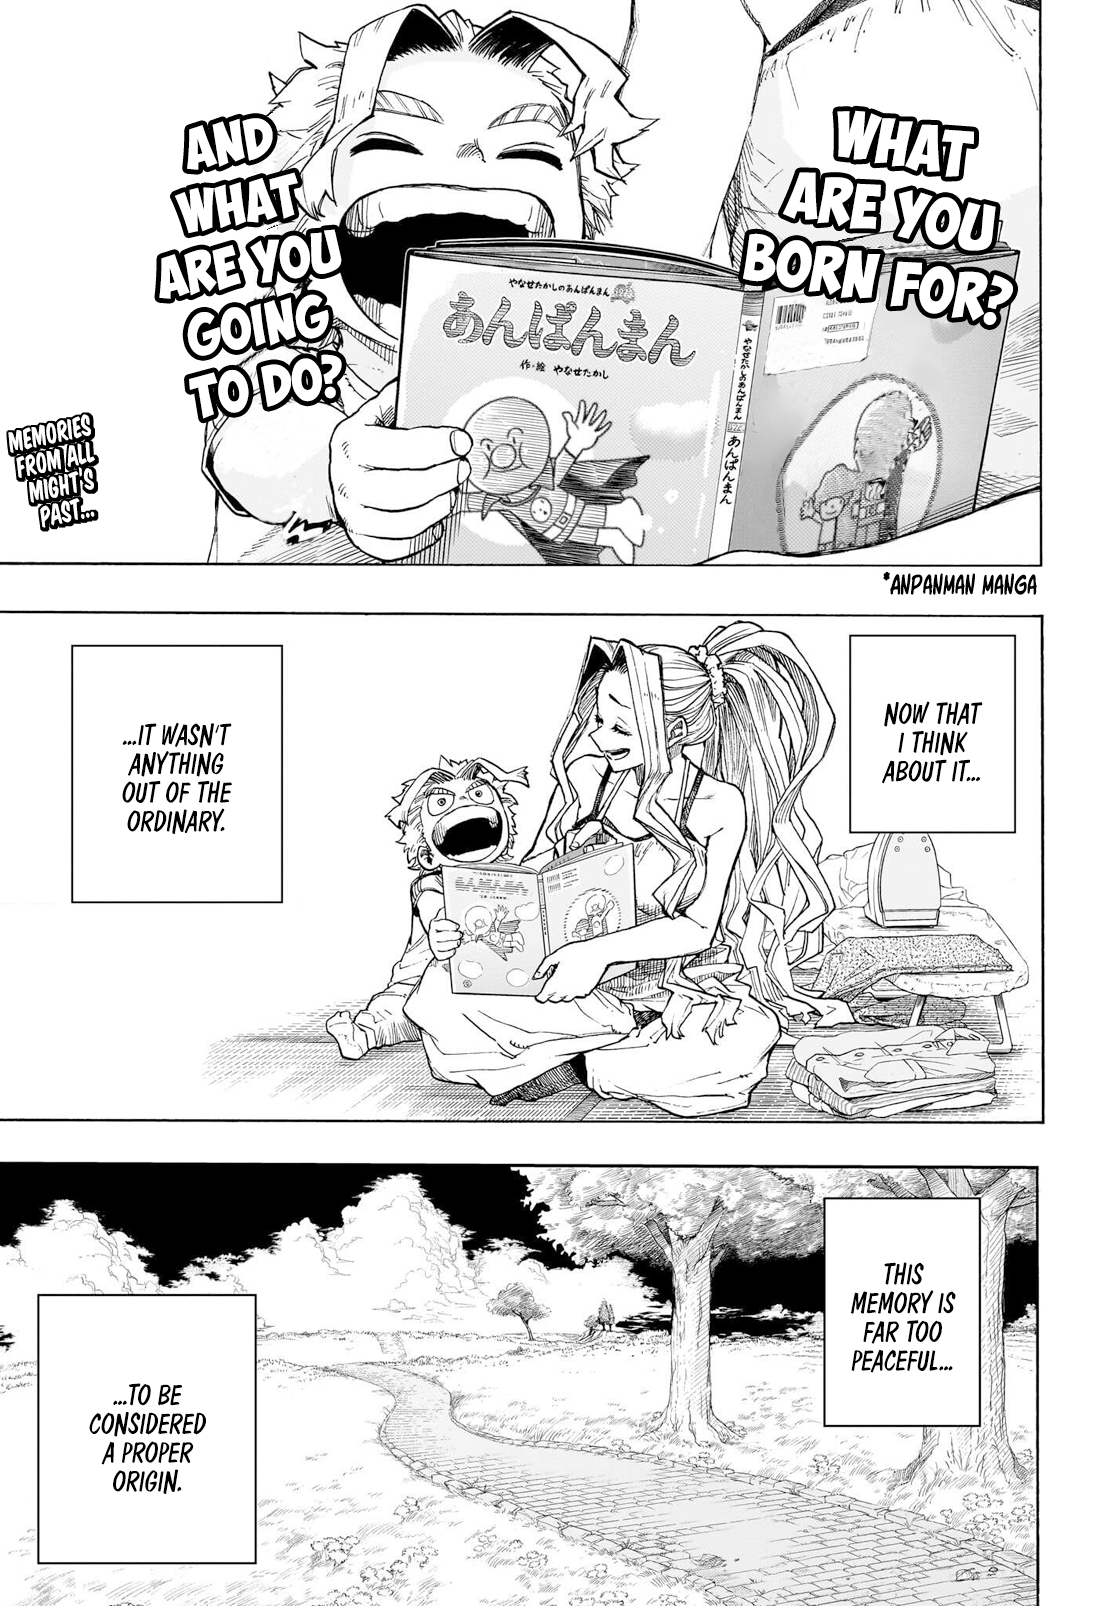 Chapter - Boku no Hero Academia Chapter 405 Discussion, Page 2